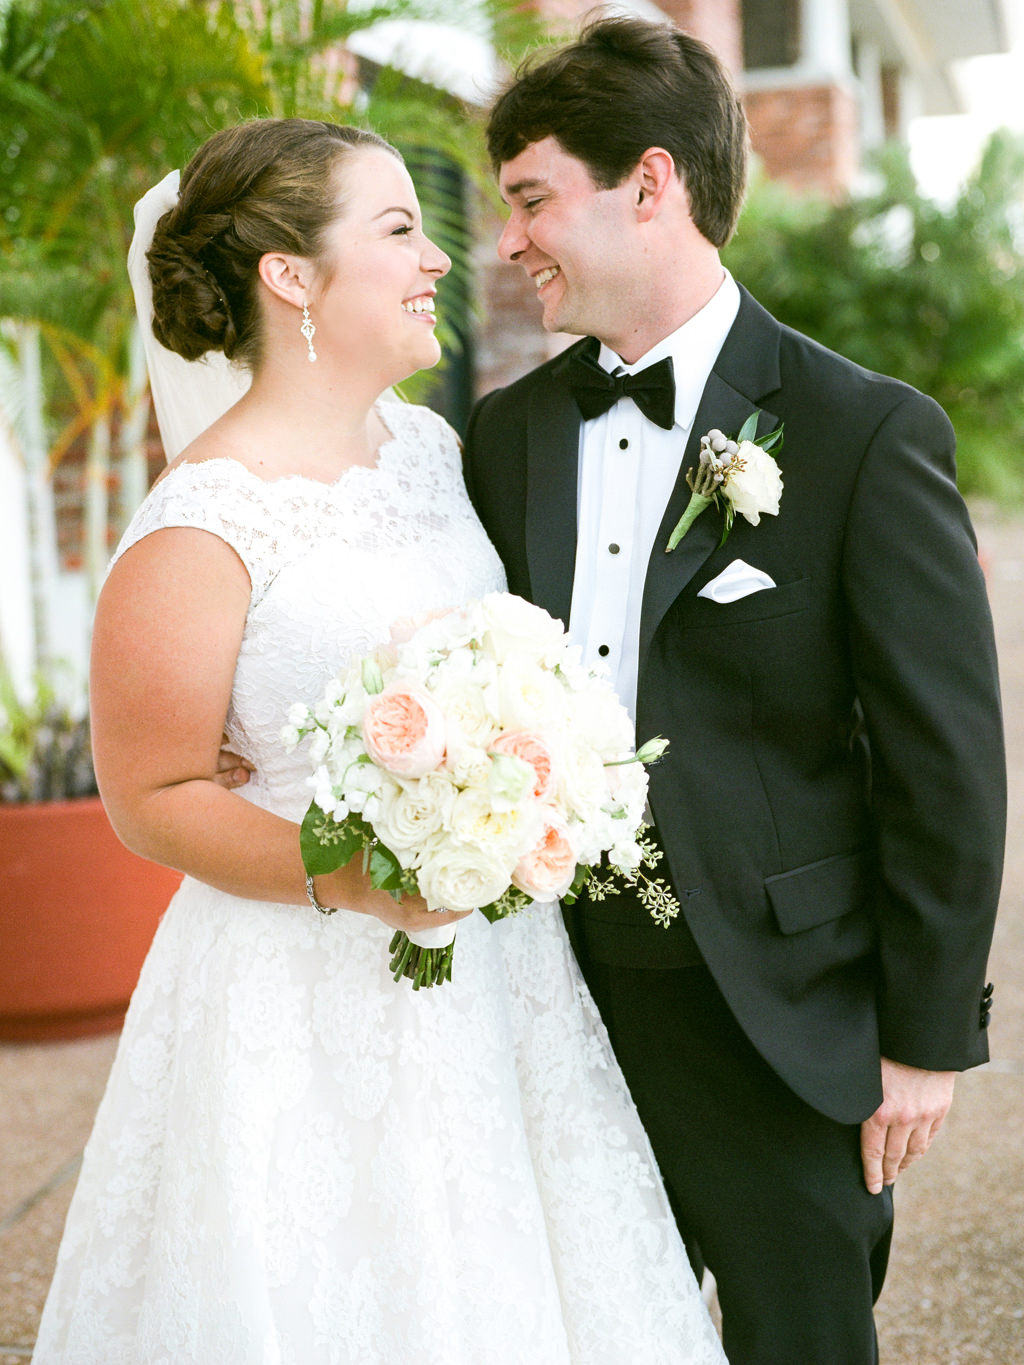 Florida Bride and Groom Wedding Portrait, Bride in Lace A Line Off the Shoulder Neckline Wedding Dress with White, Ivory and Blush Pink Floral Bouquet, Groom in Black Tuxedo